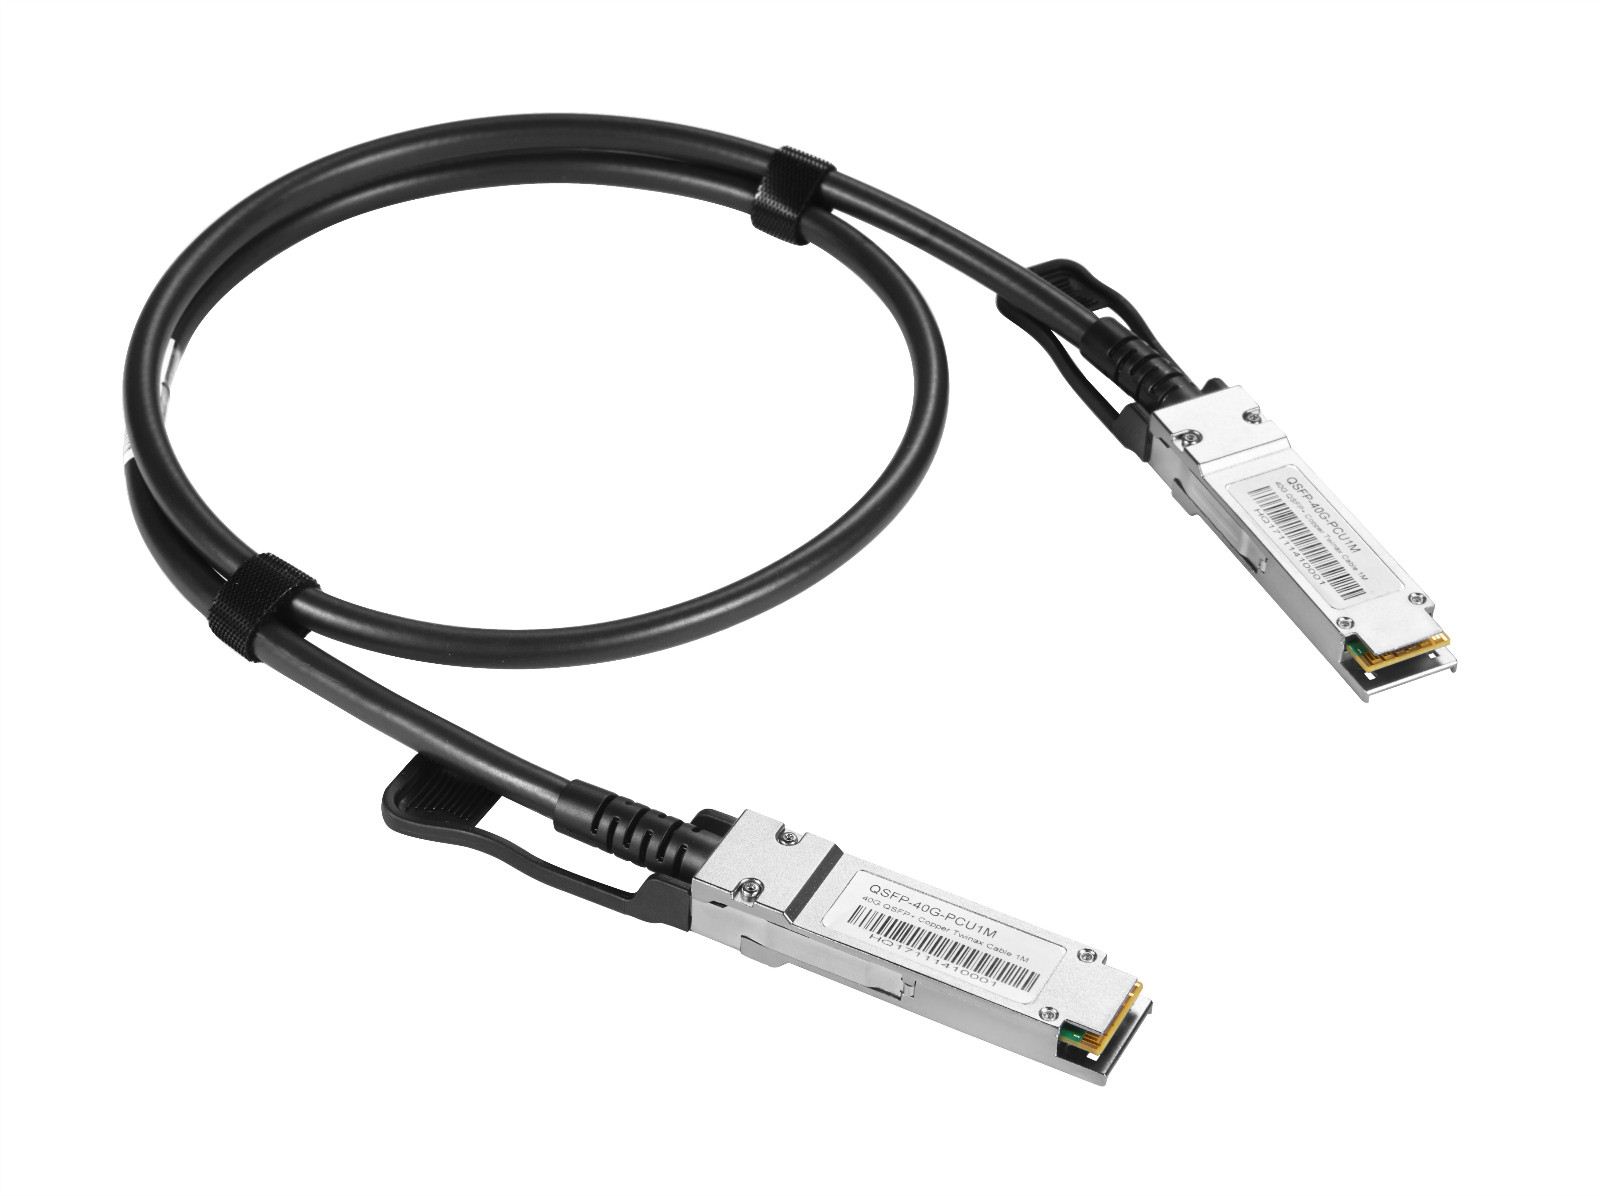 HTD-Infor provides you withDirect Attach Cablesand whole-he